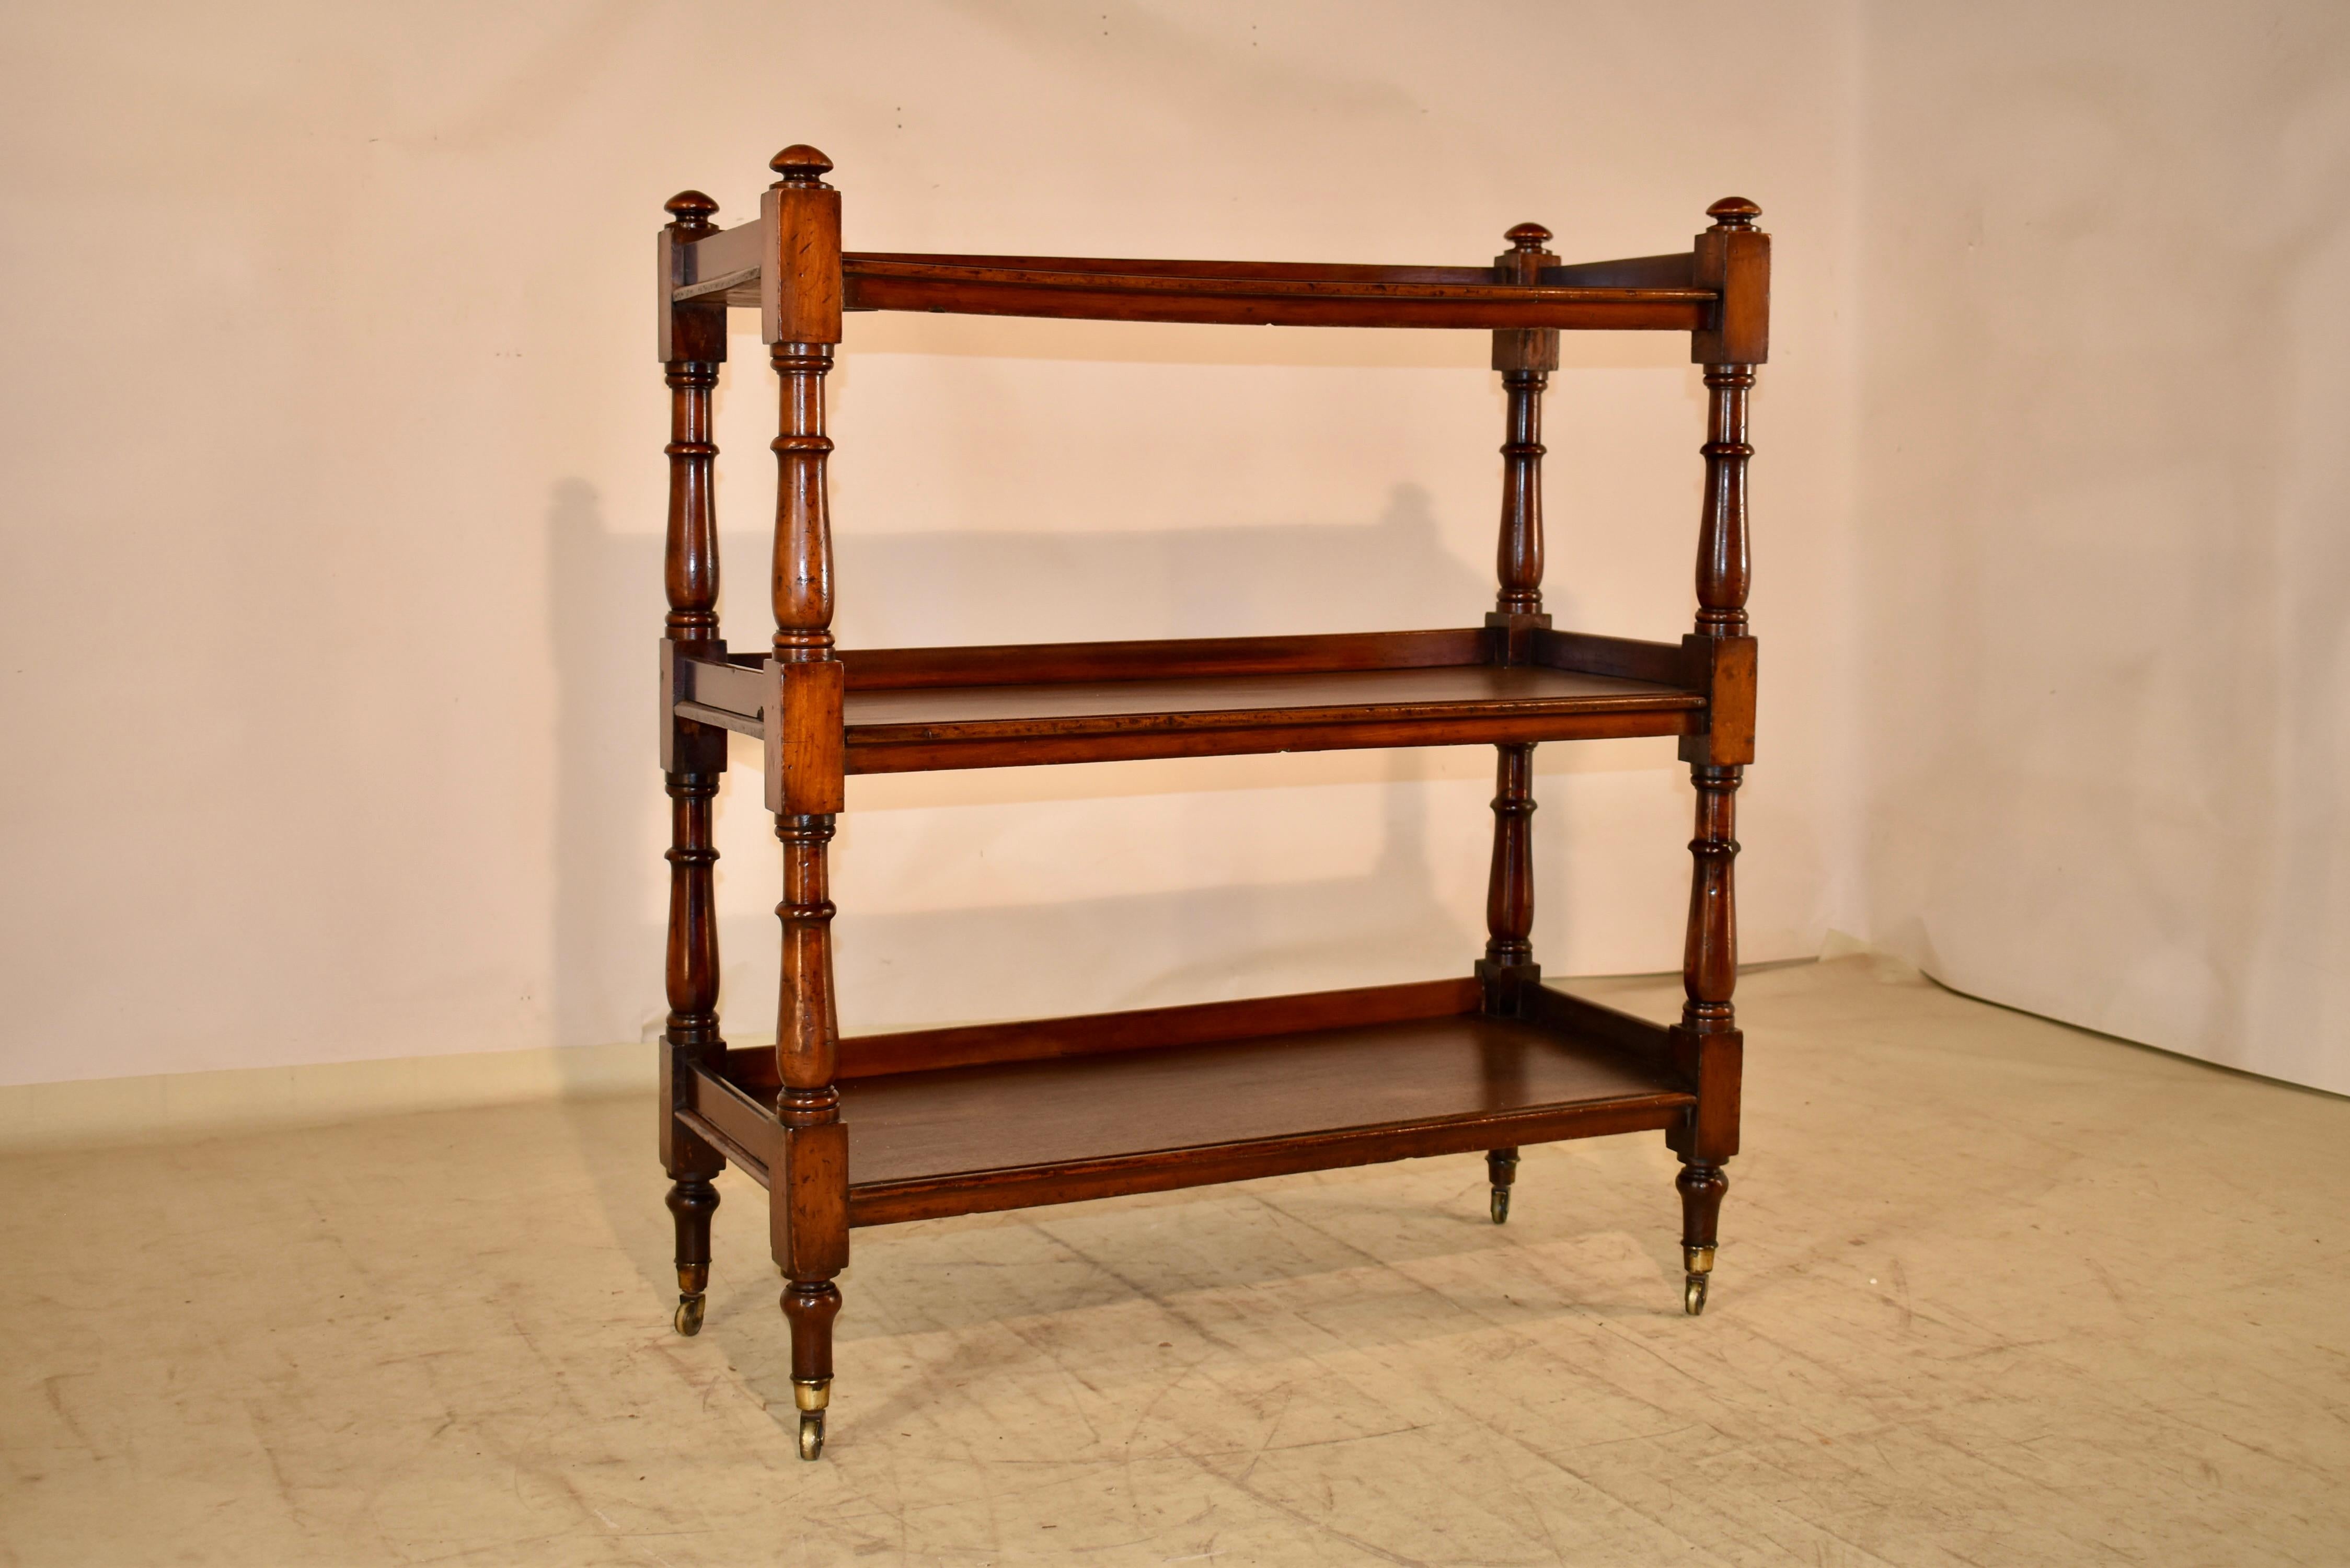 19th century English dessert buffet made from Mahogany.  The piece has finials at the top over three shelves, all with galleries on three sides.  The shelf supports are hand turned.  The aprons beneath the shelves have signs of wear, which are